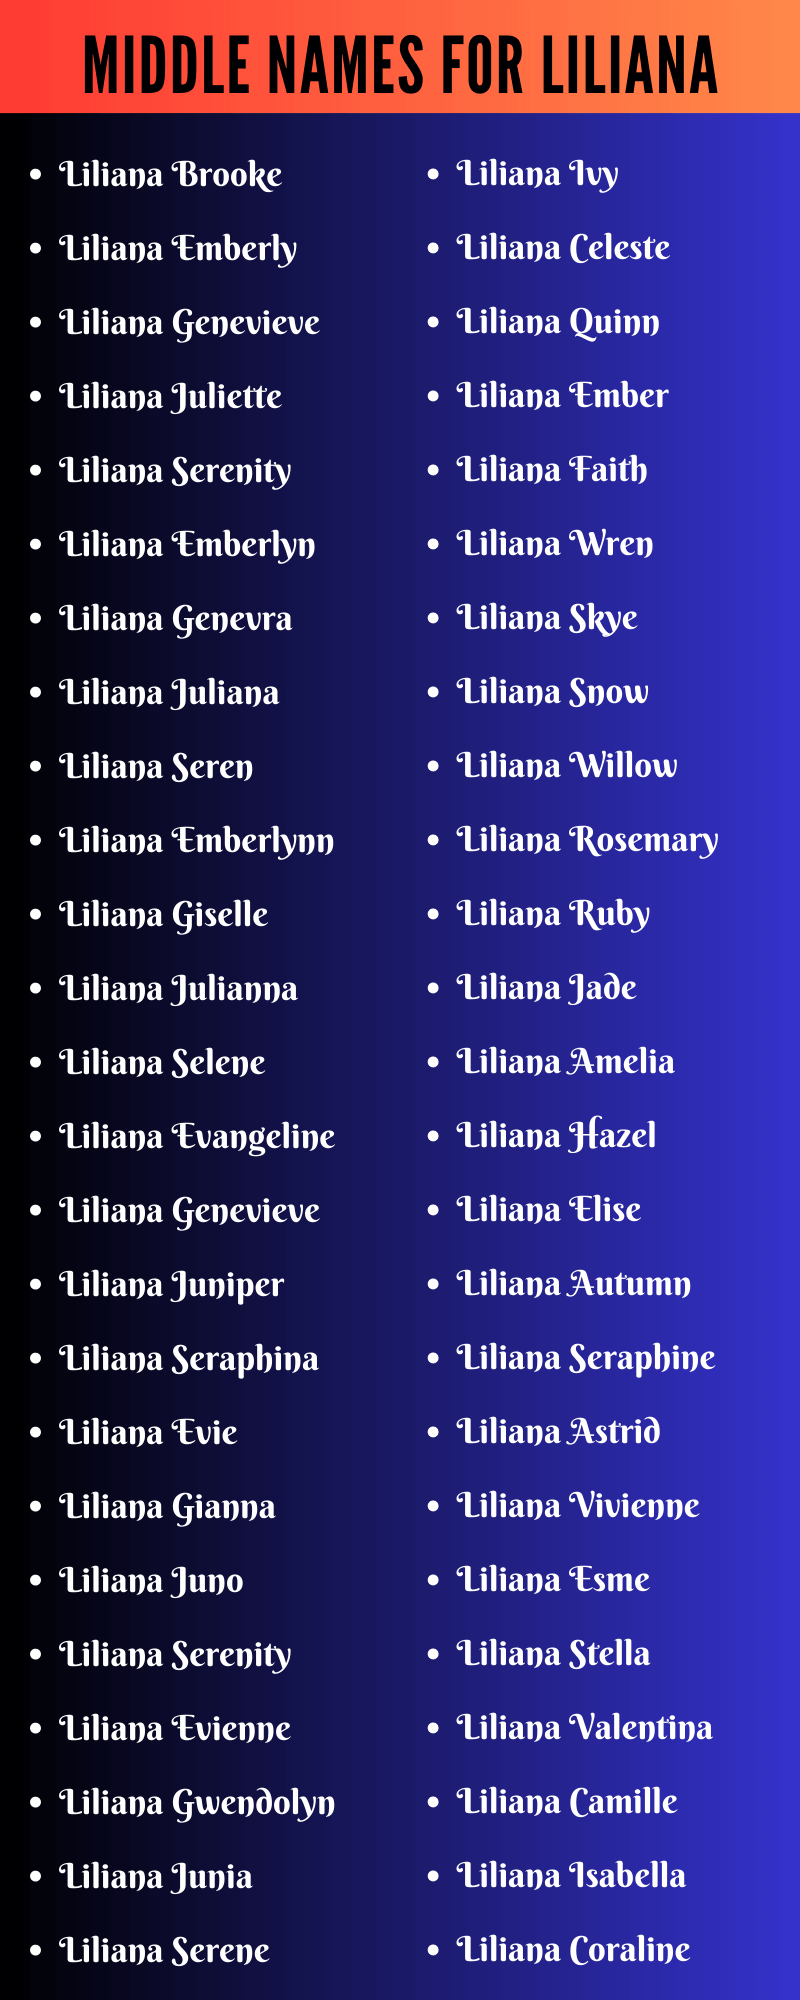 Middle Names For Liliana